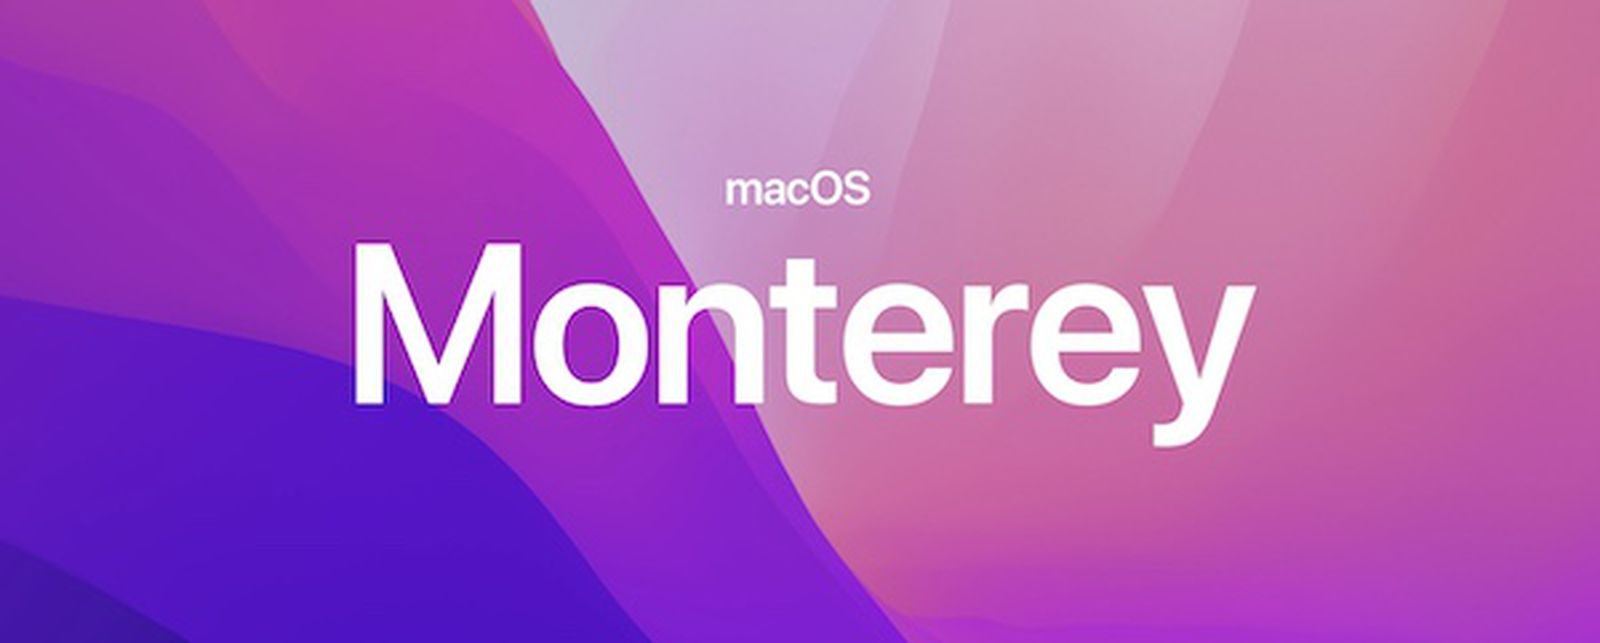 macOS Monterey: Everything We Know